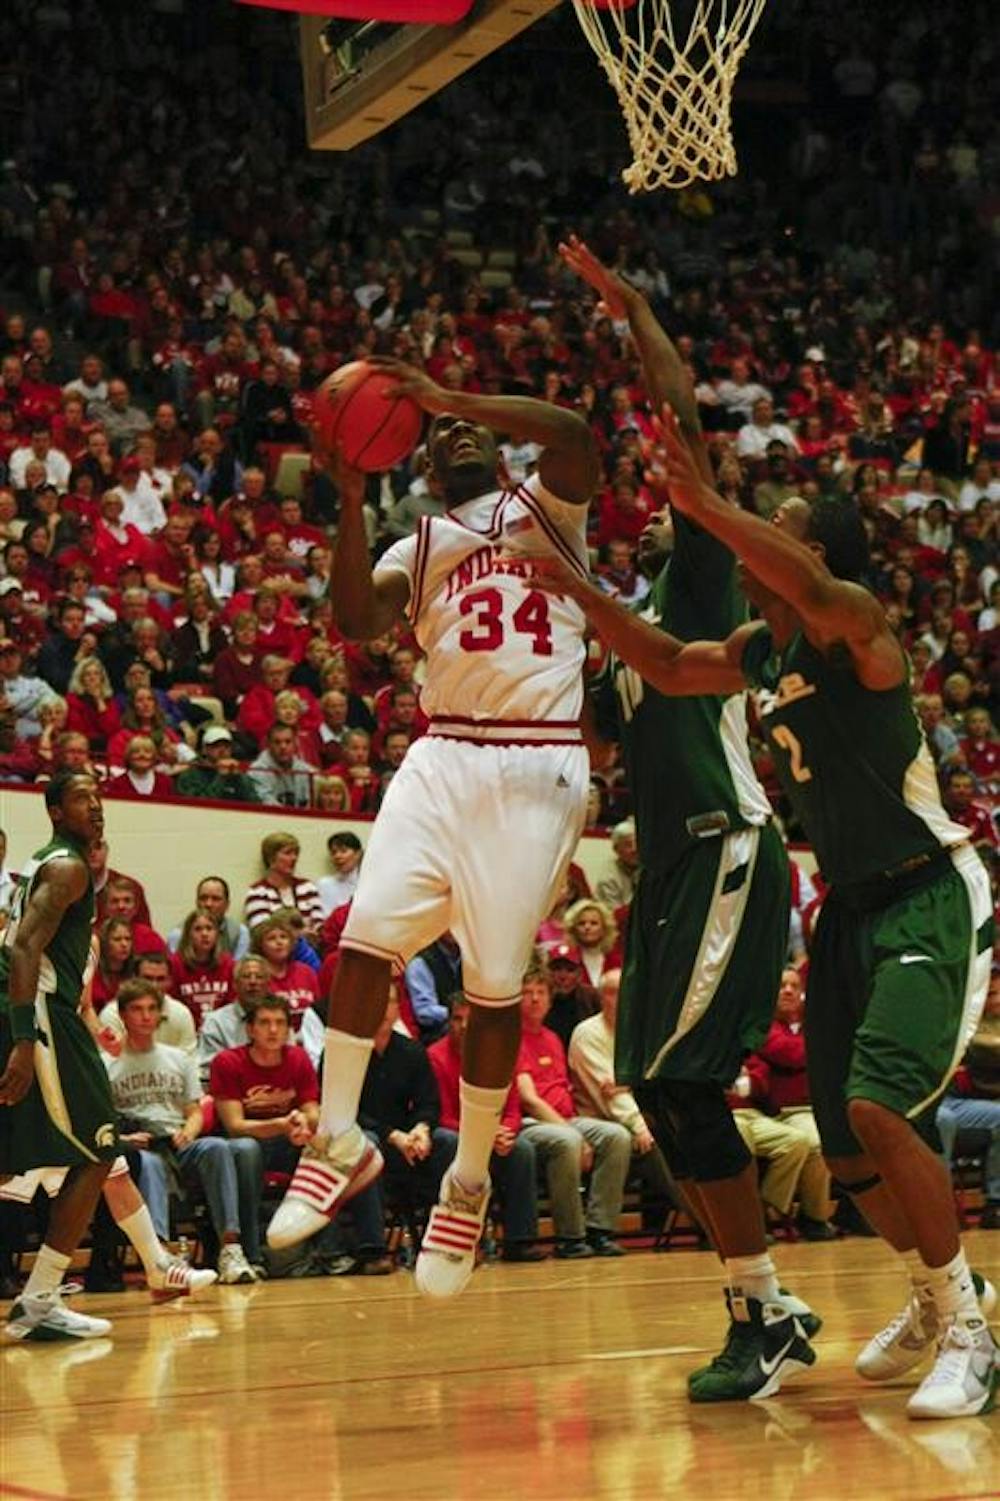 Freshman Guard/Forward Malik Story goes for a basket against a Michigan State defender Tuesday evening at Assembly Hall. The Hoosiers lost to Michigan State with a final score of 59-64.